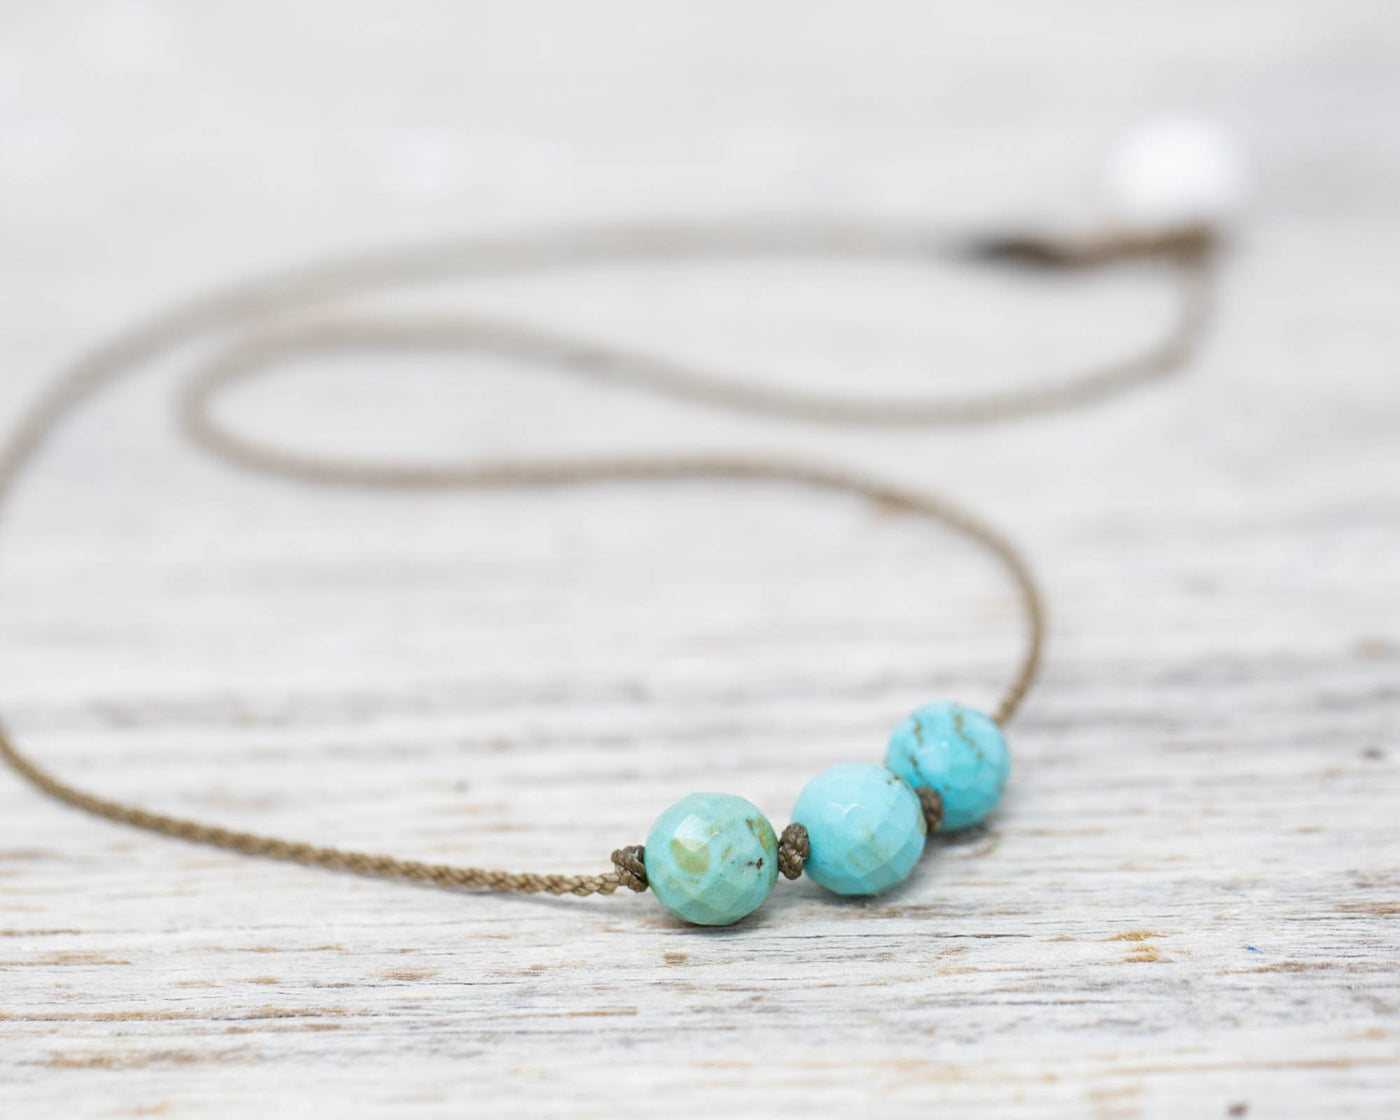 Triple Knotted Necklace-1116-Turquoise Howlite Faceted Round Medium